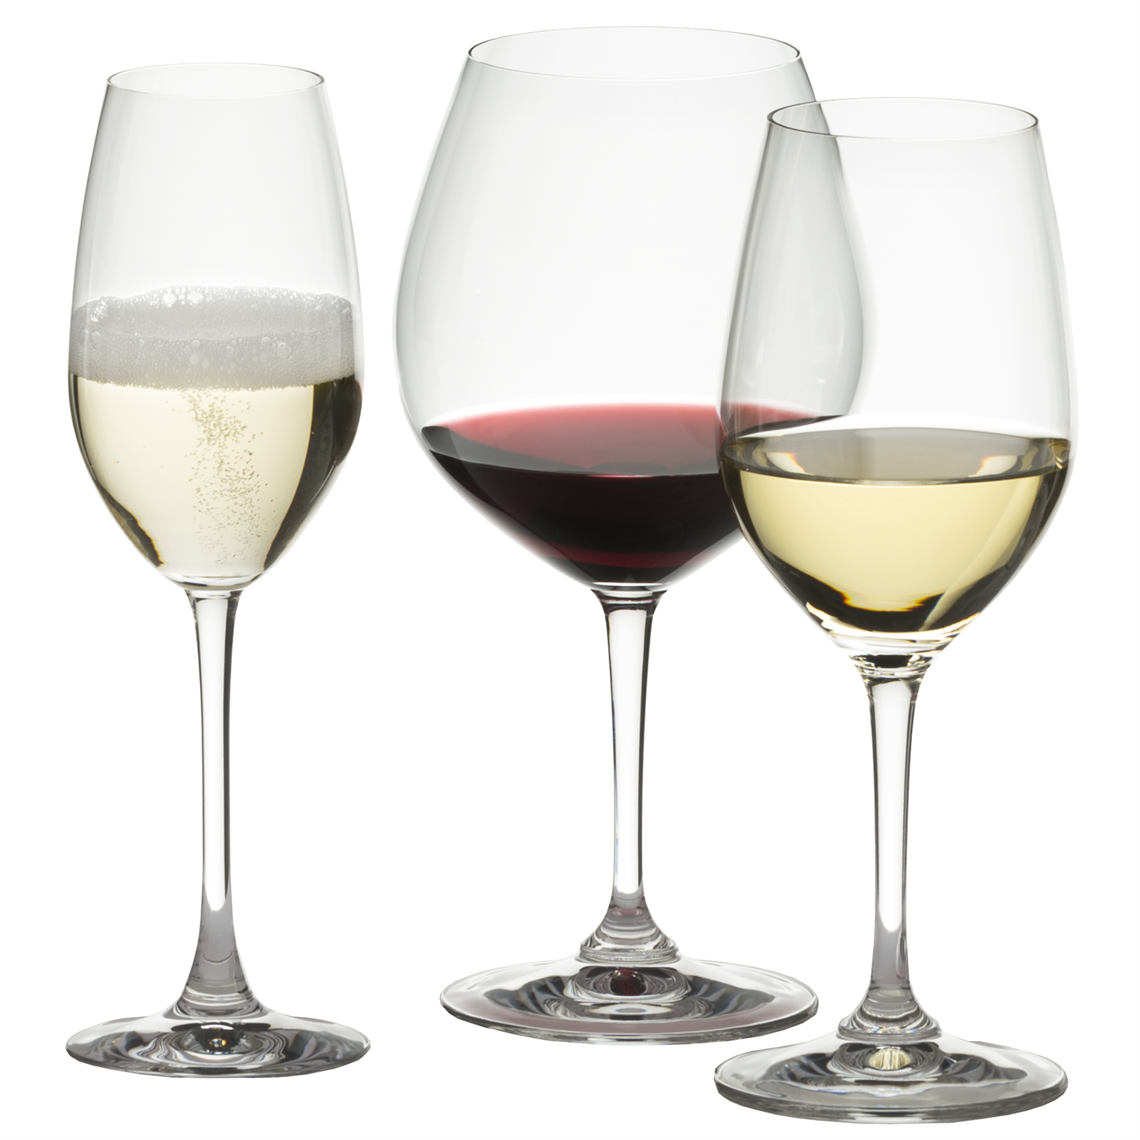 View more sydonios from our Restaurant & Trade Glasses range